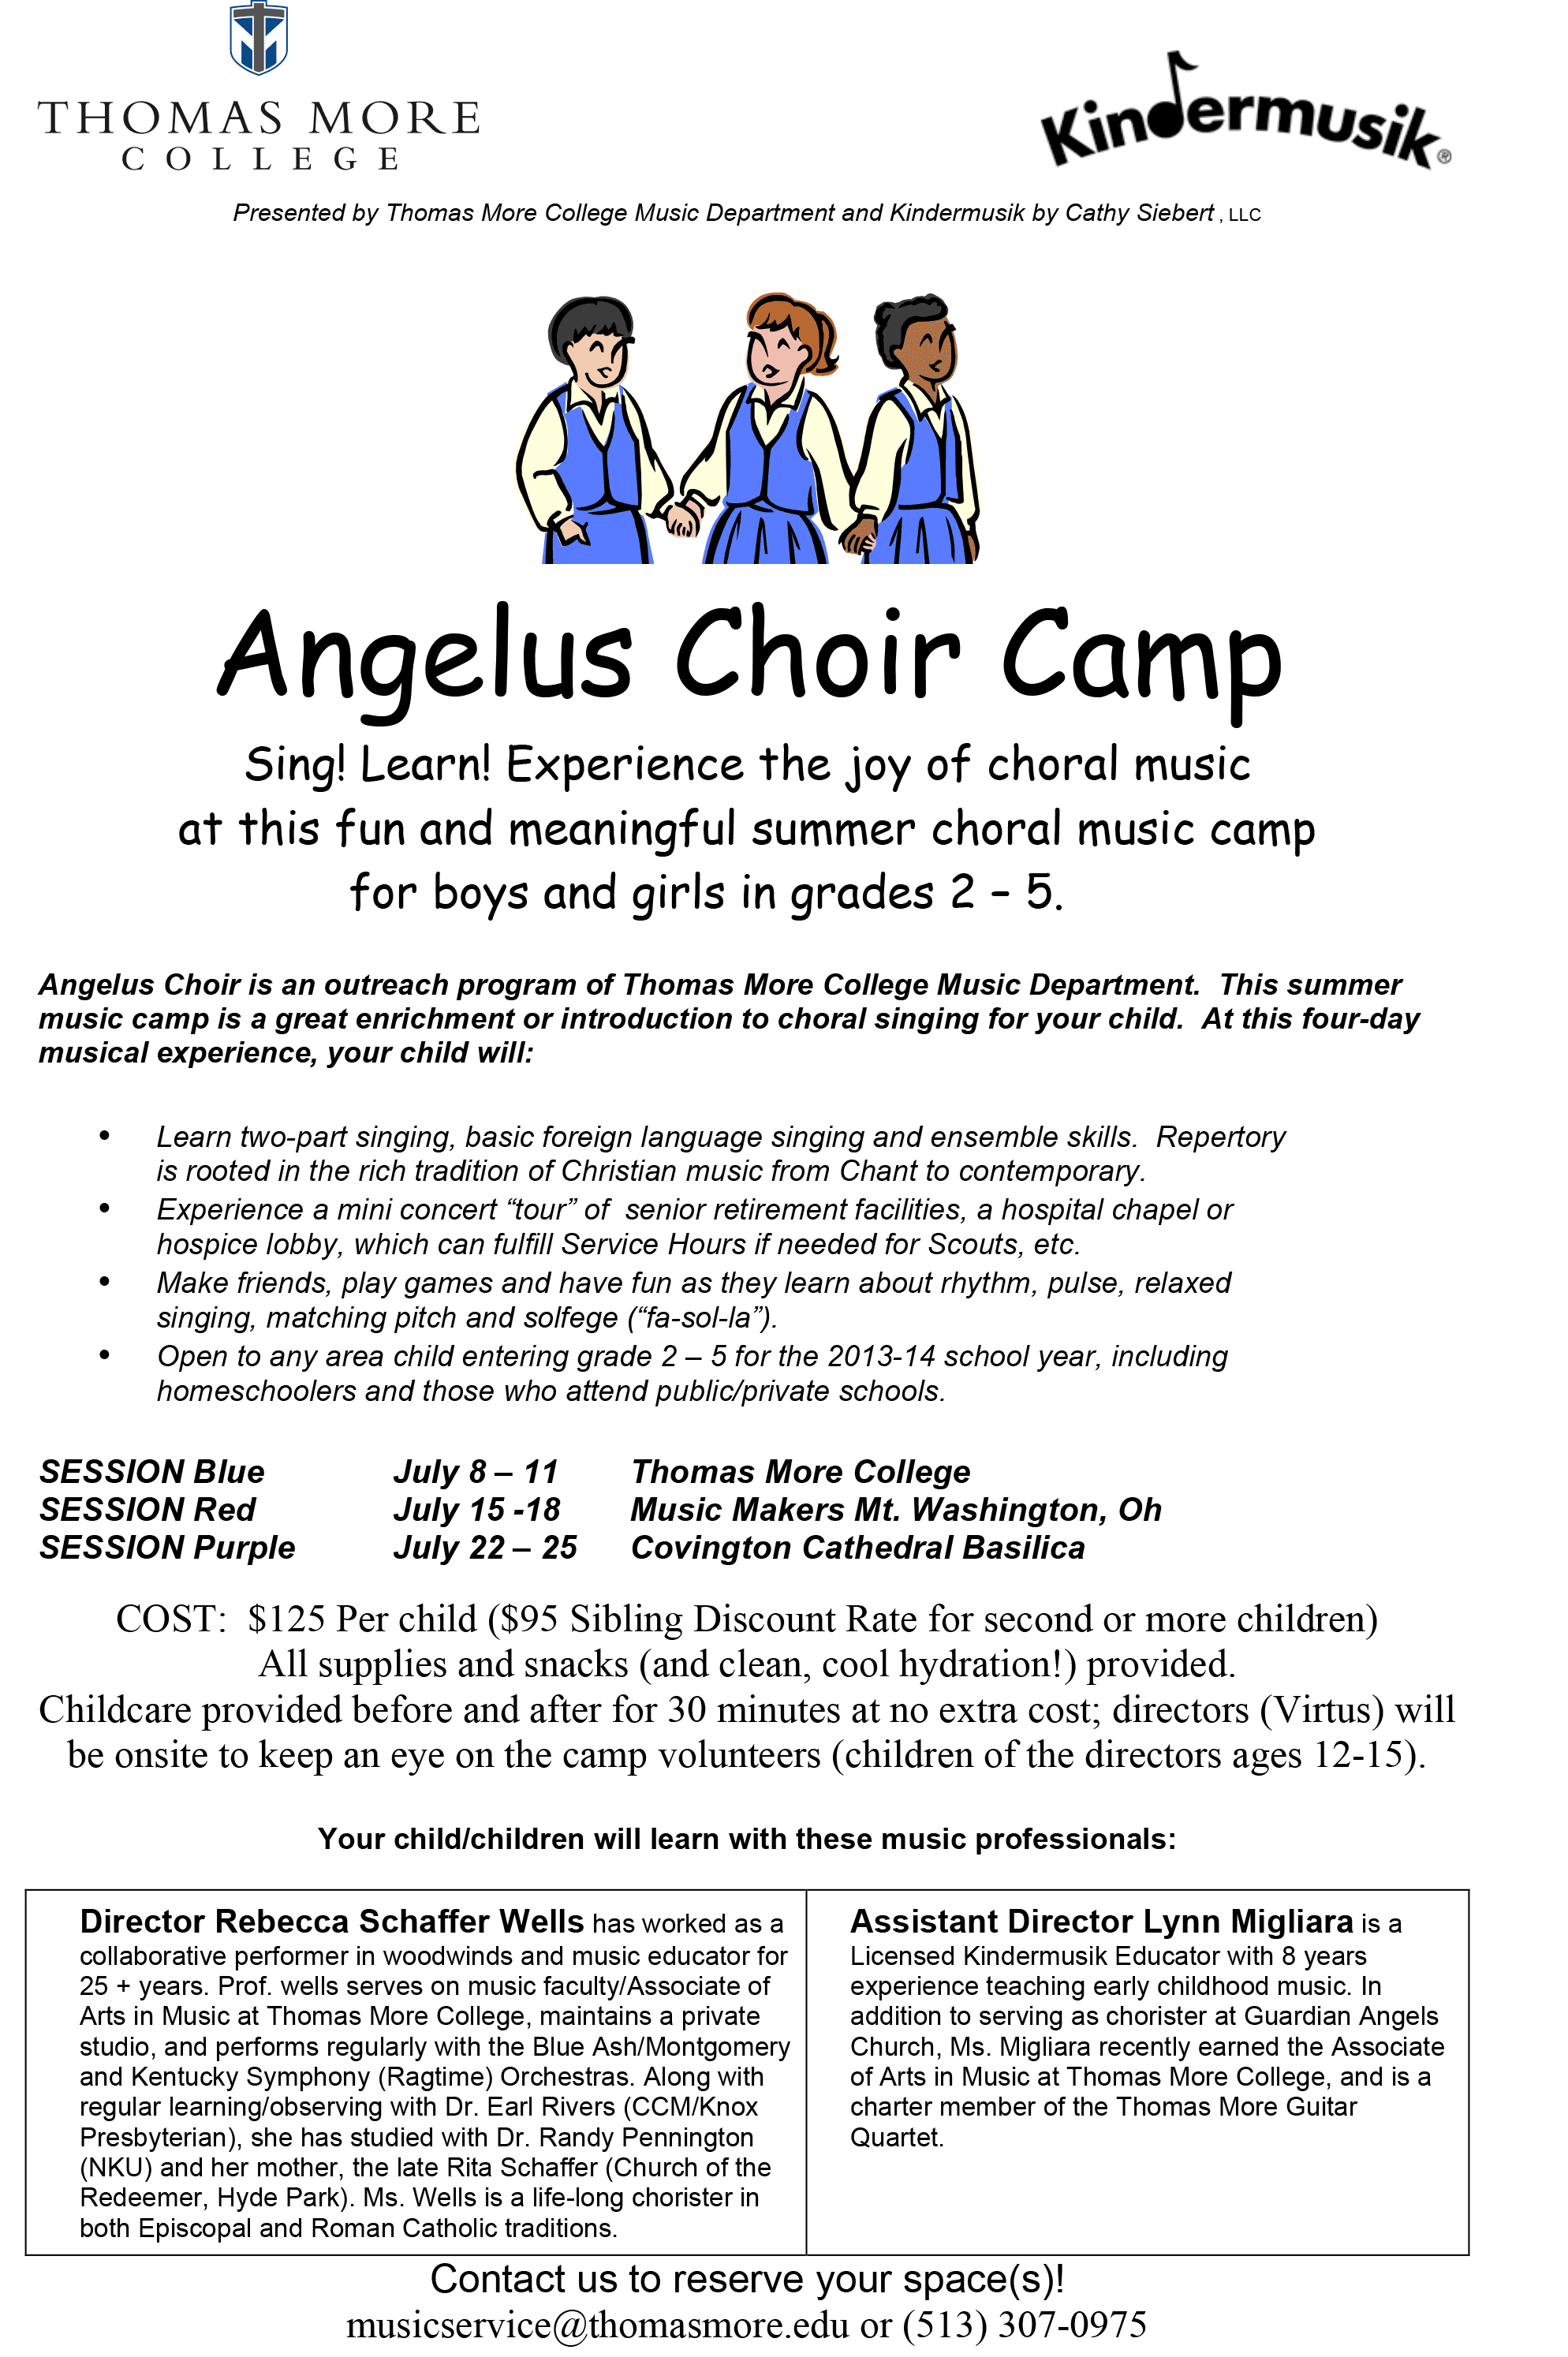 Thomas More College Music Department and Kindermusik by Cathy Siebert, LLC team up to offer Angelus Choir Camp